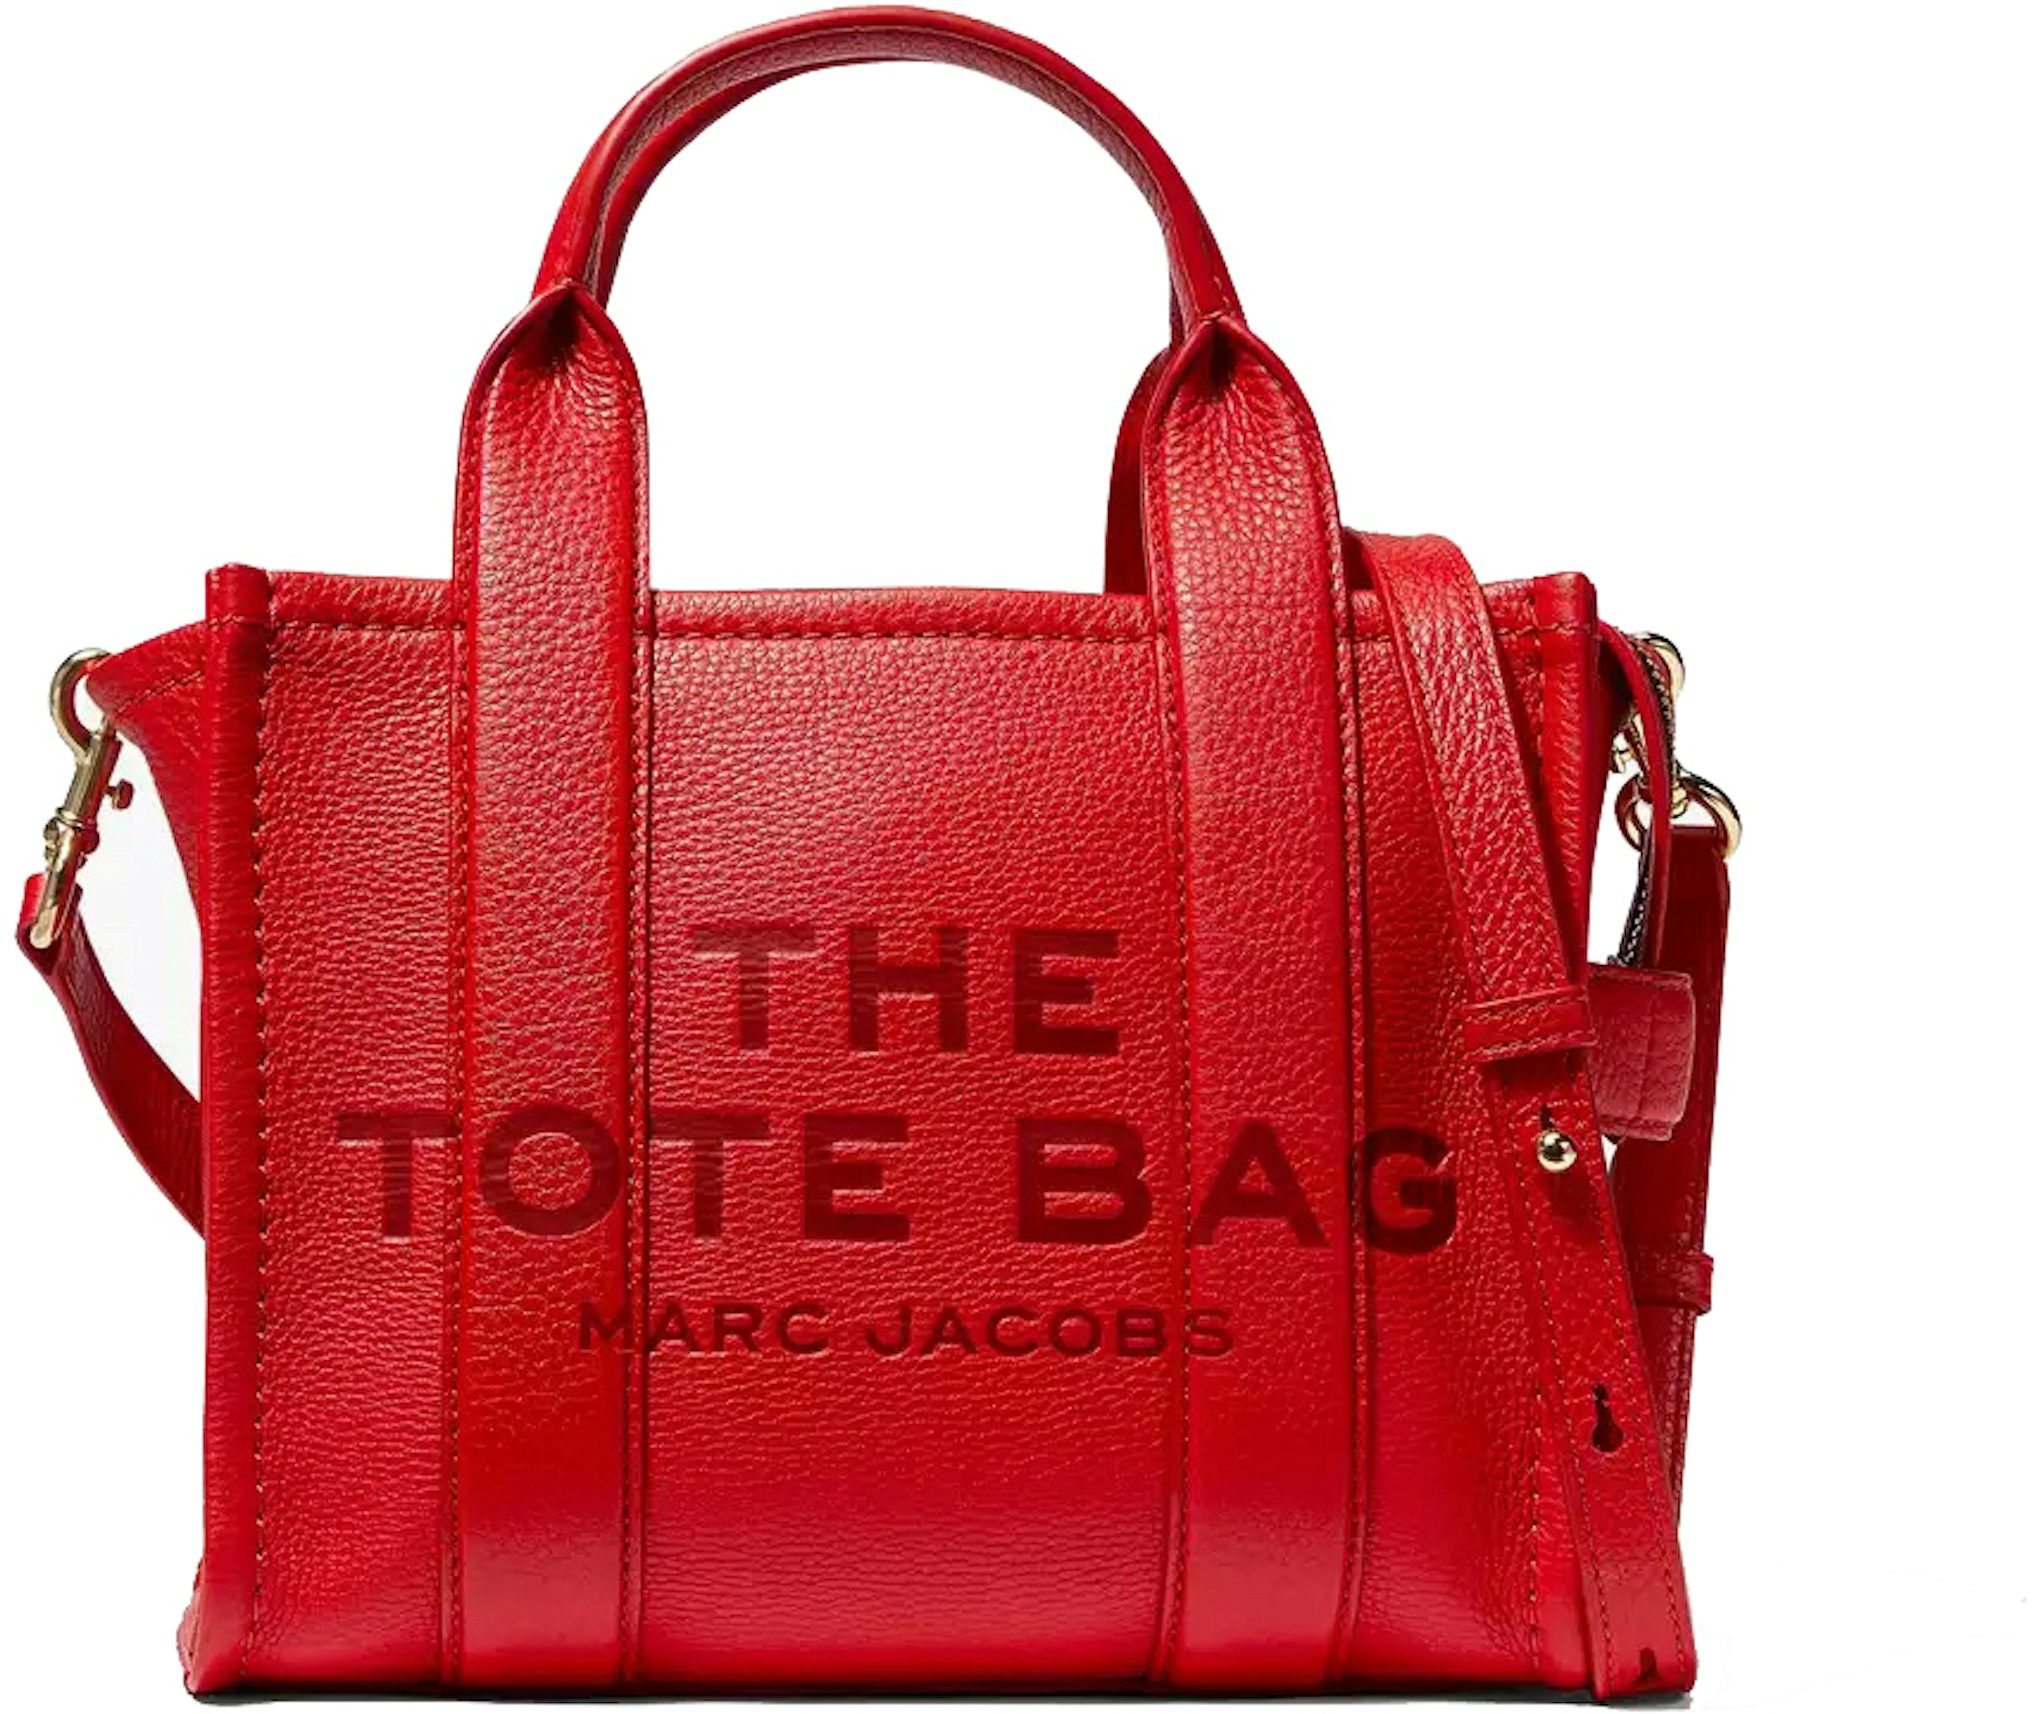 The Mini Tote Bag - Marc Jacobs - Daybreak - Leather